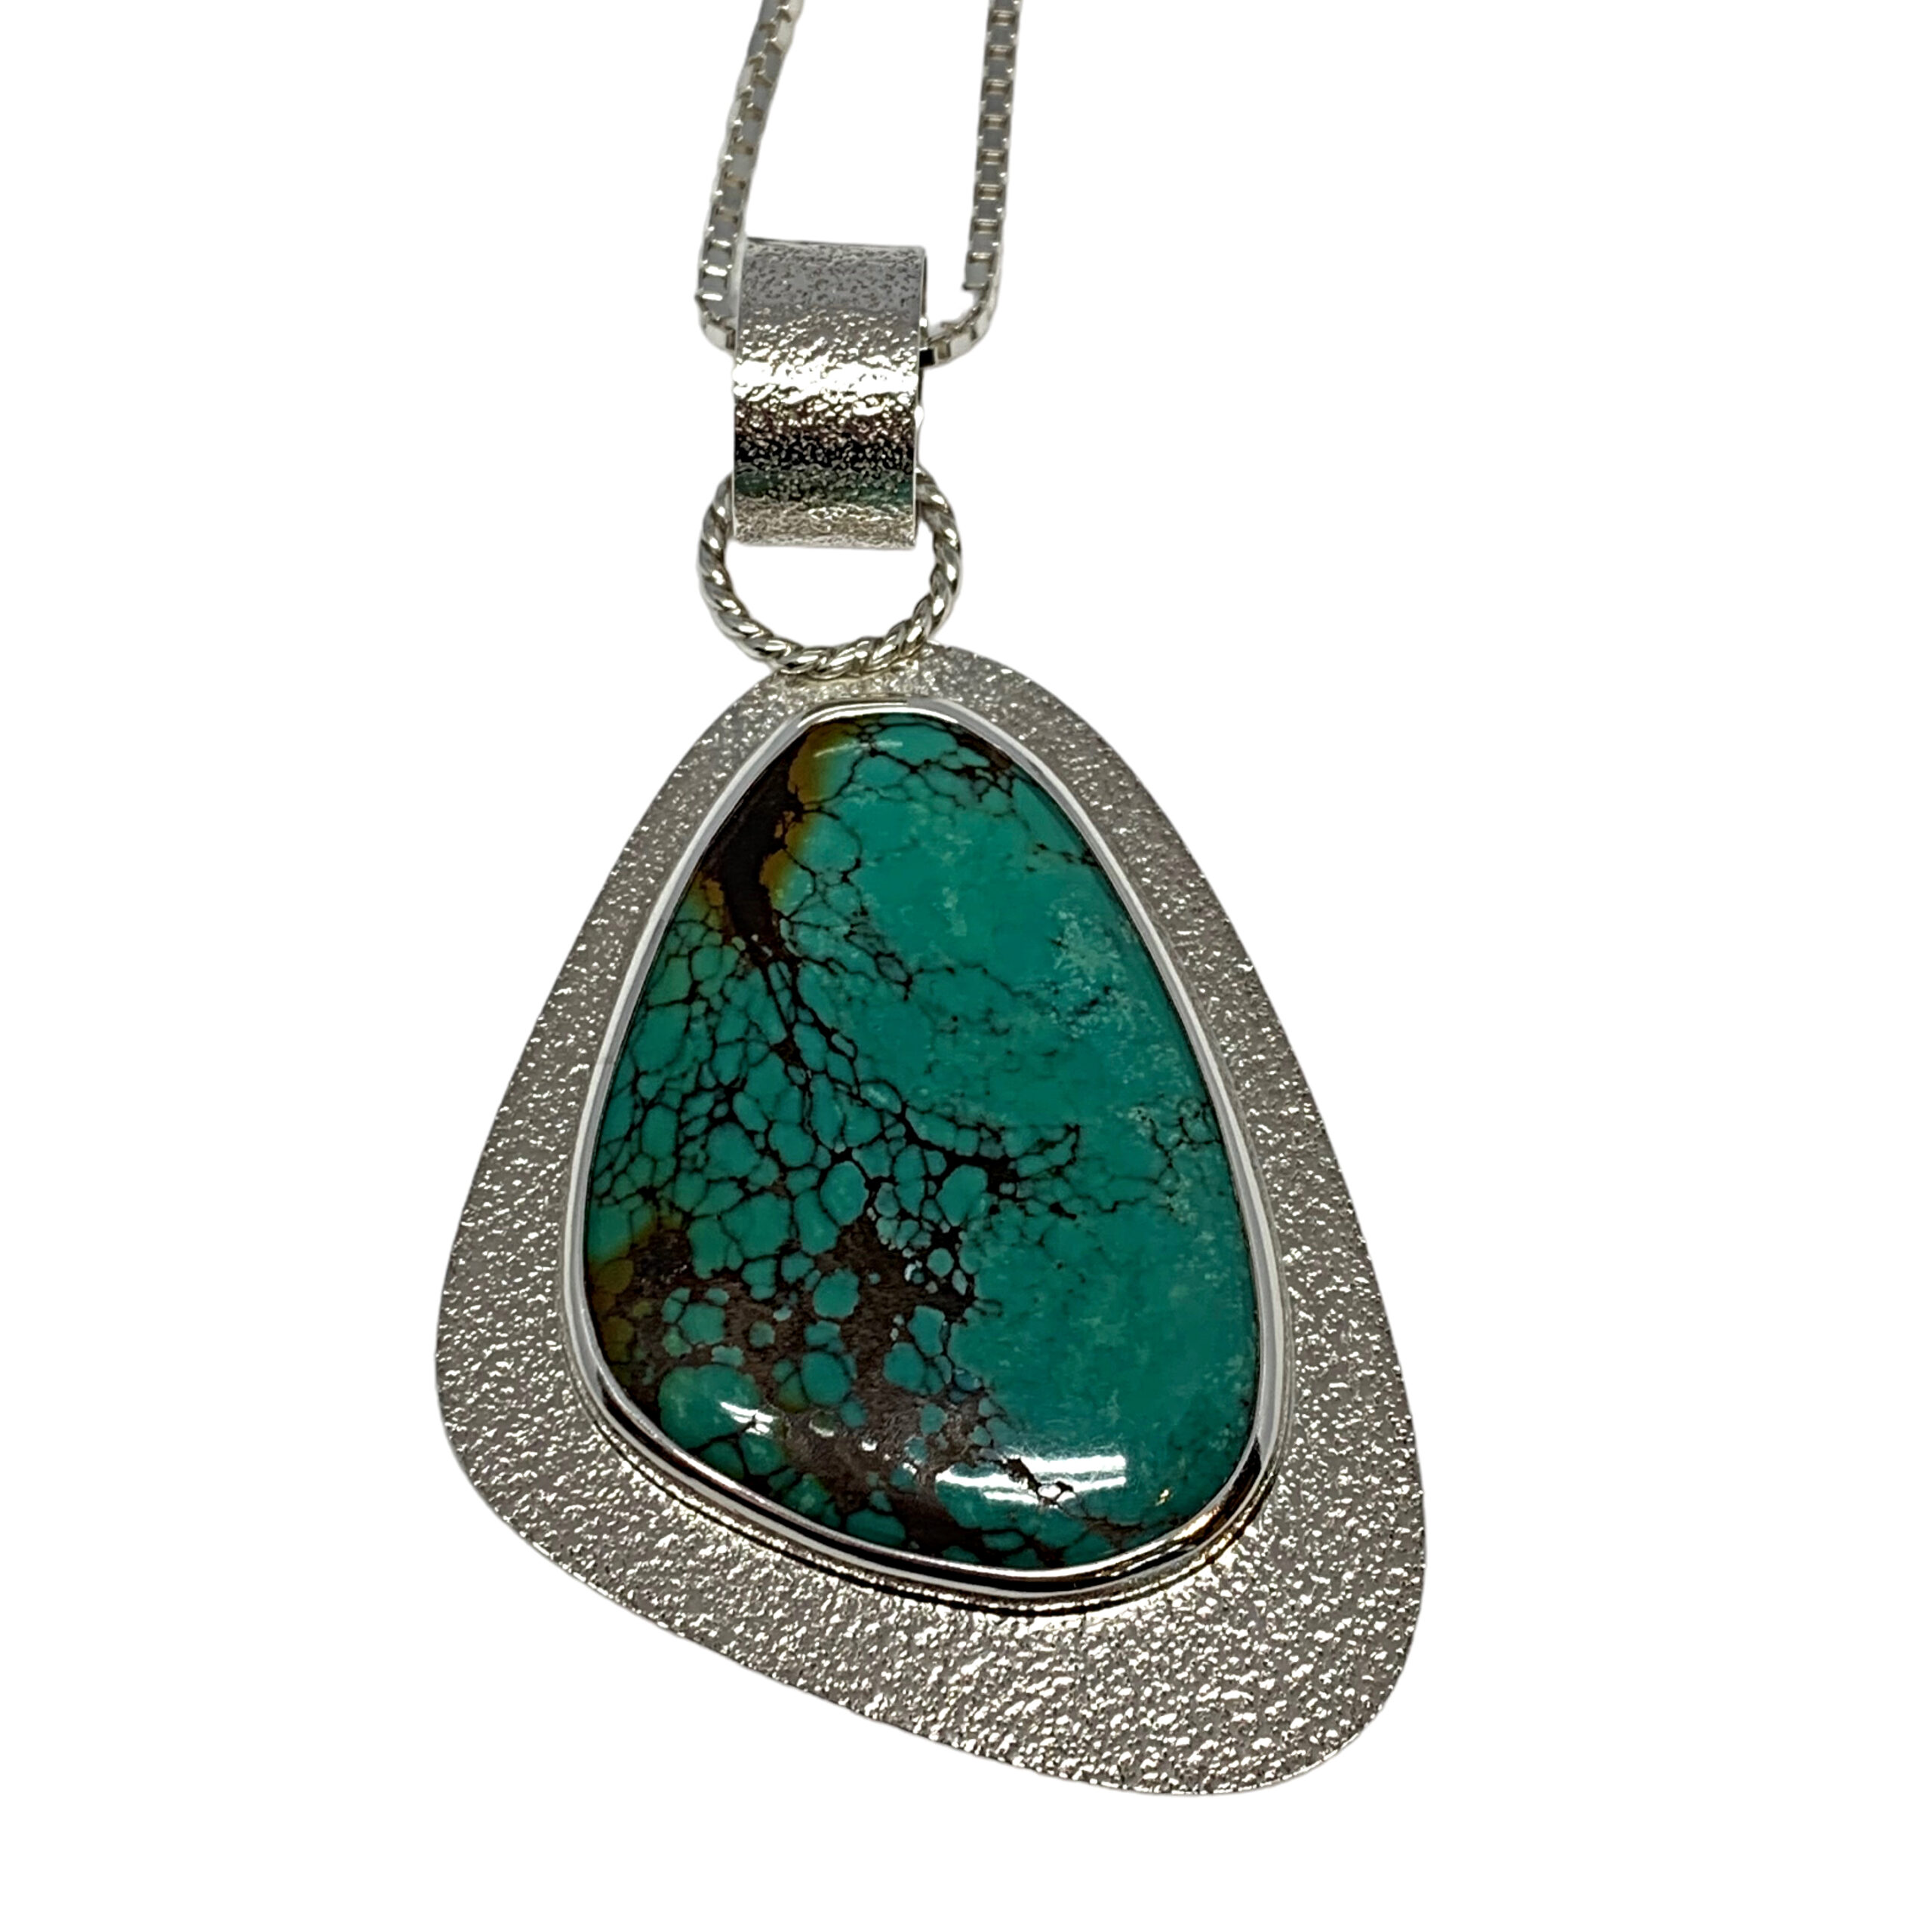 Handmade silver + turquoise necklace by A&R Jewellery | Effusion Art Gallery, Invermere BC